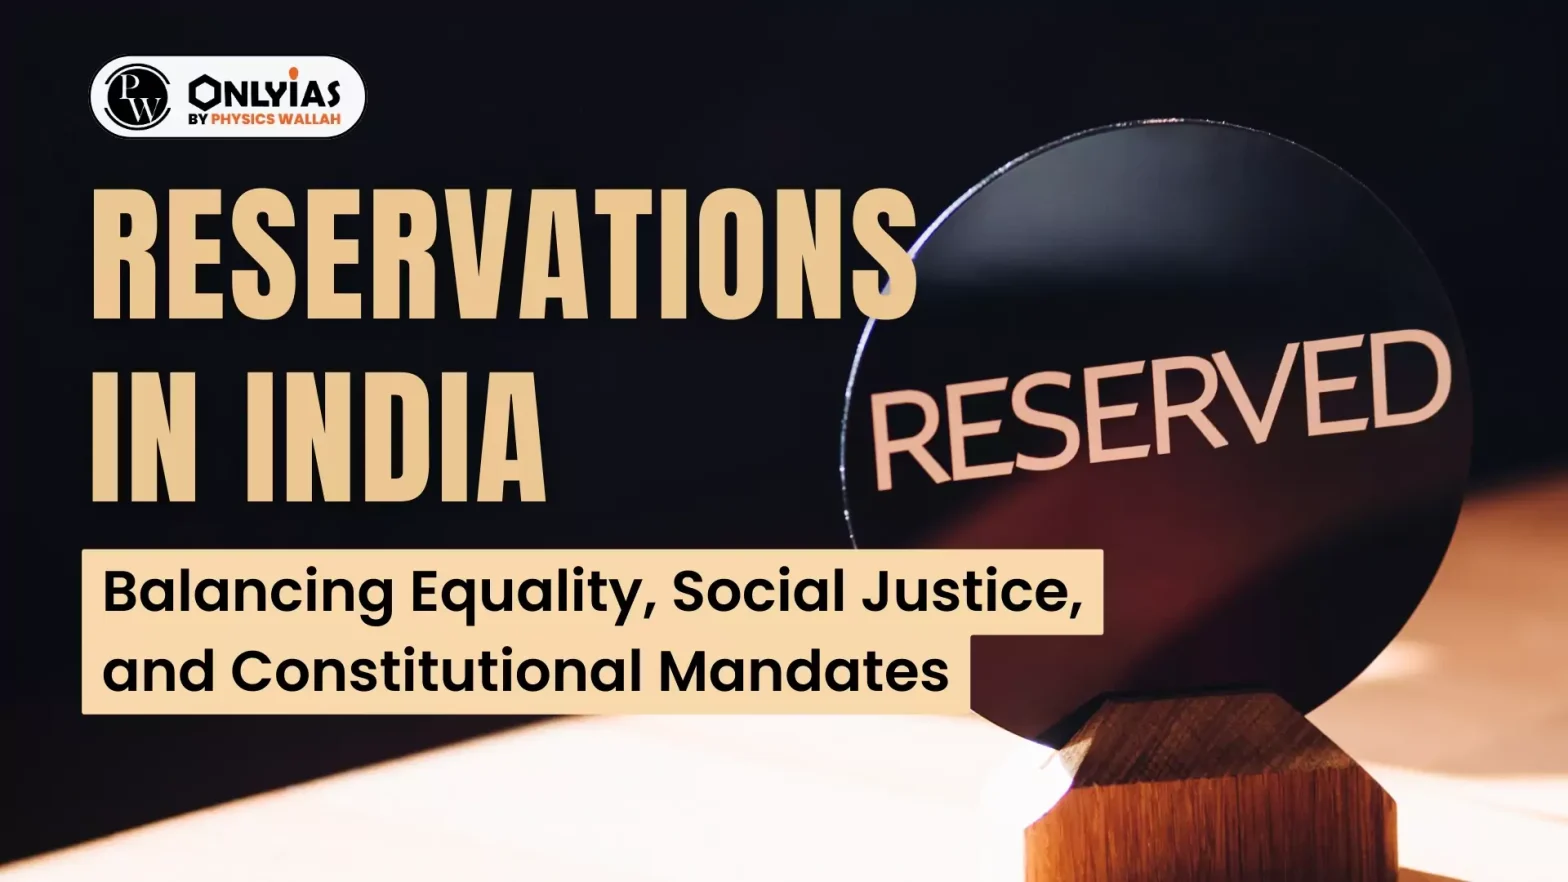 Reservations in India: Balancing Equality, Social Justice, and Constitutional Mandates